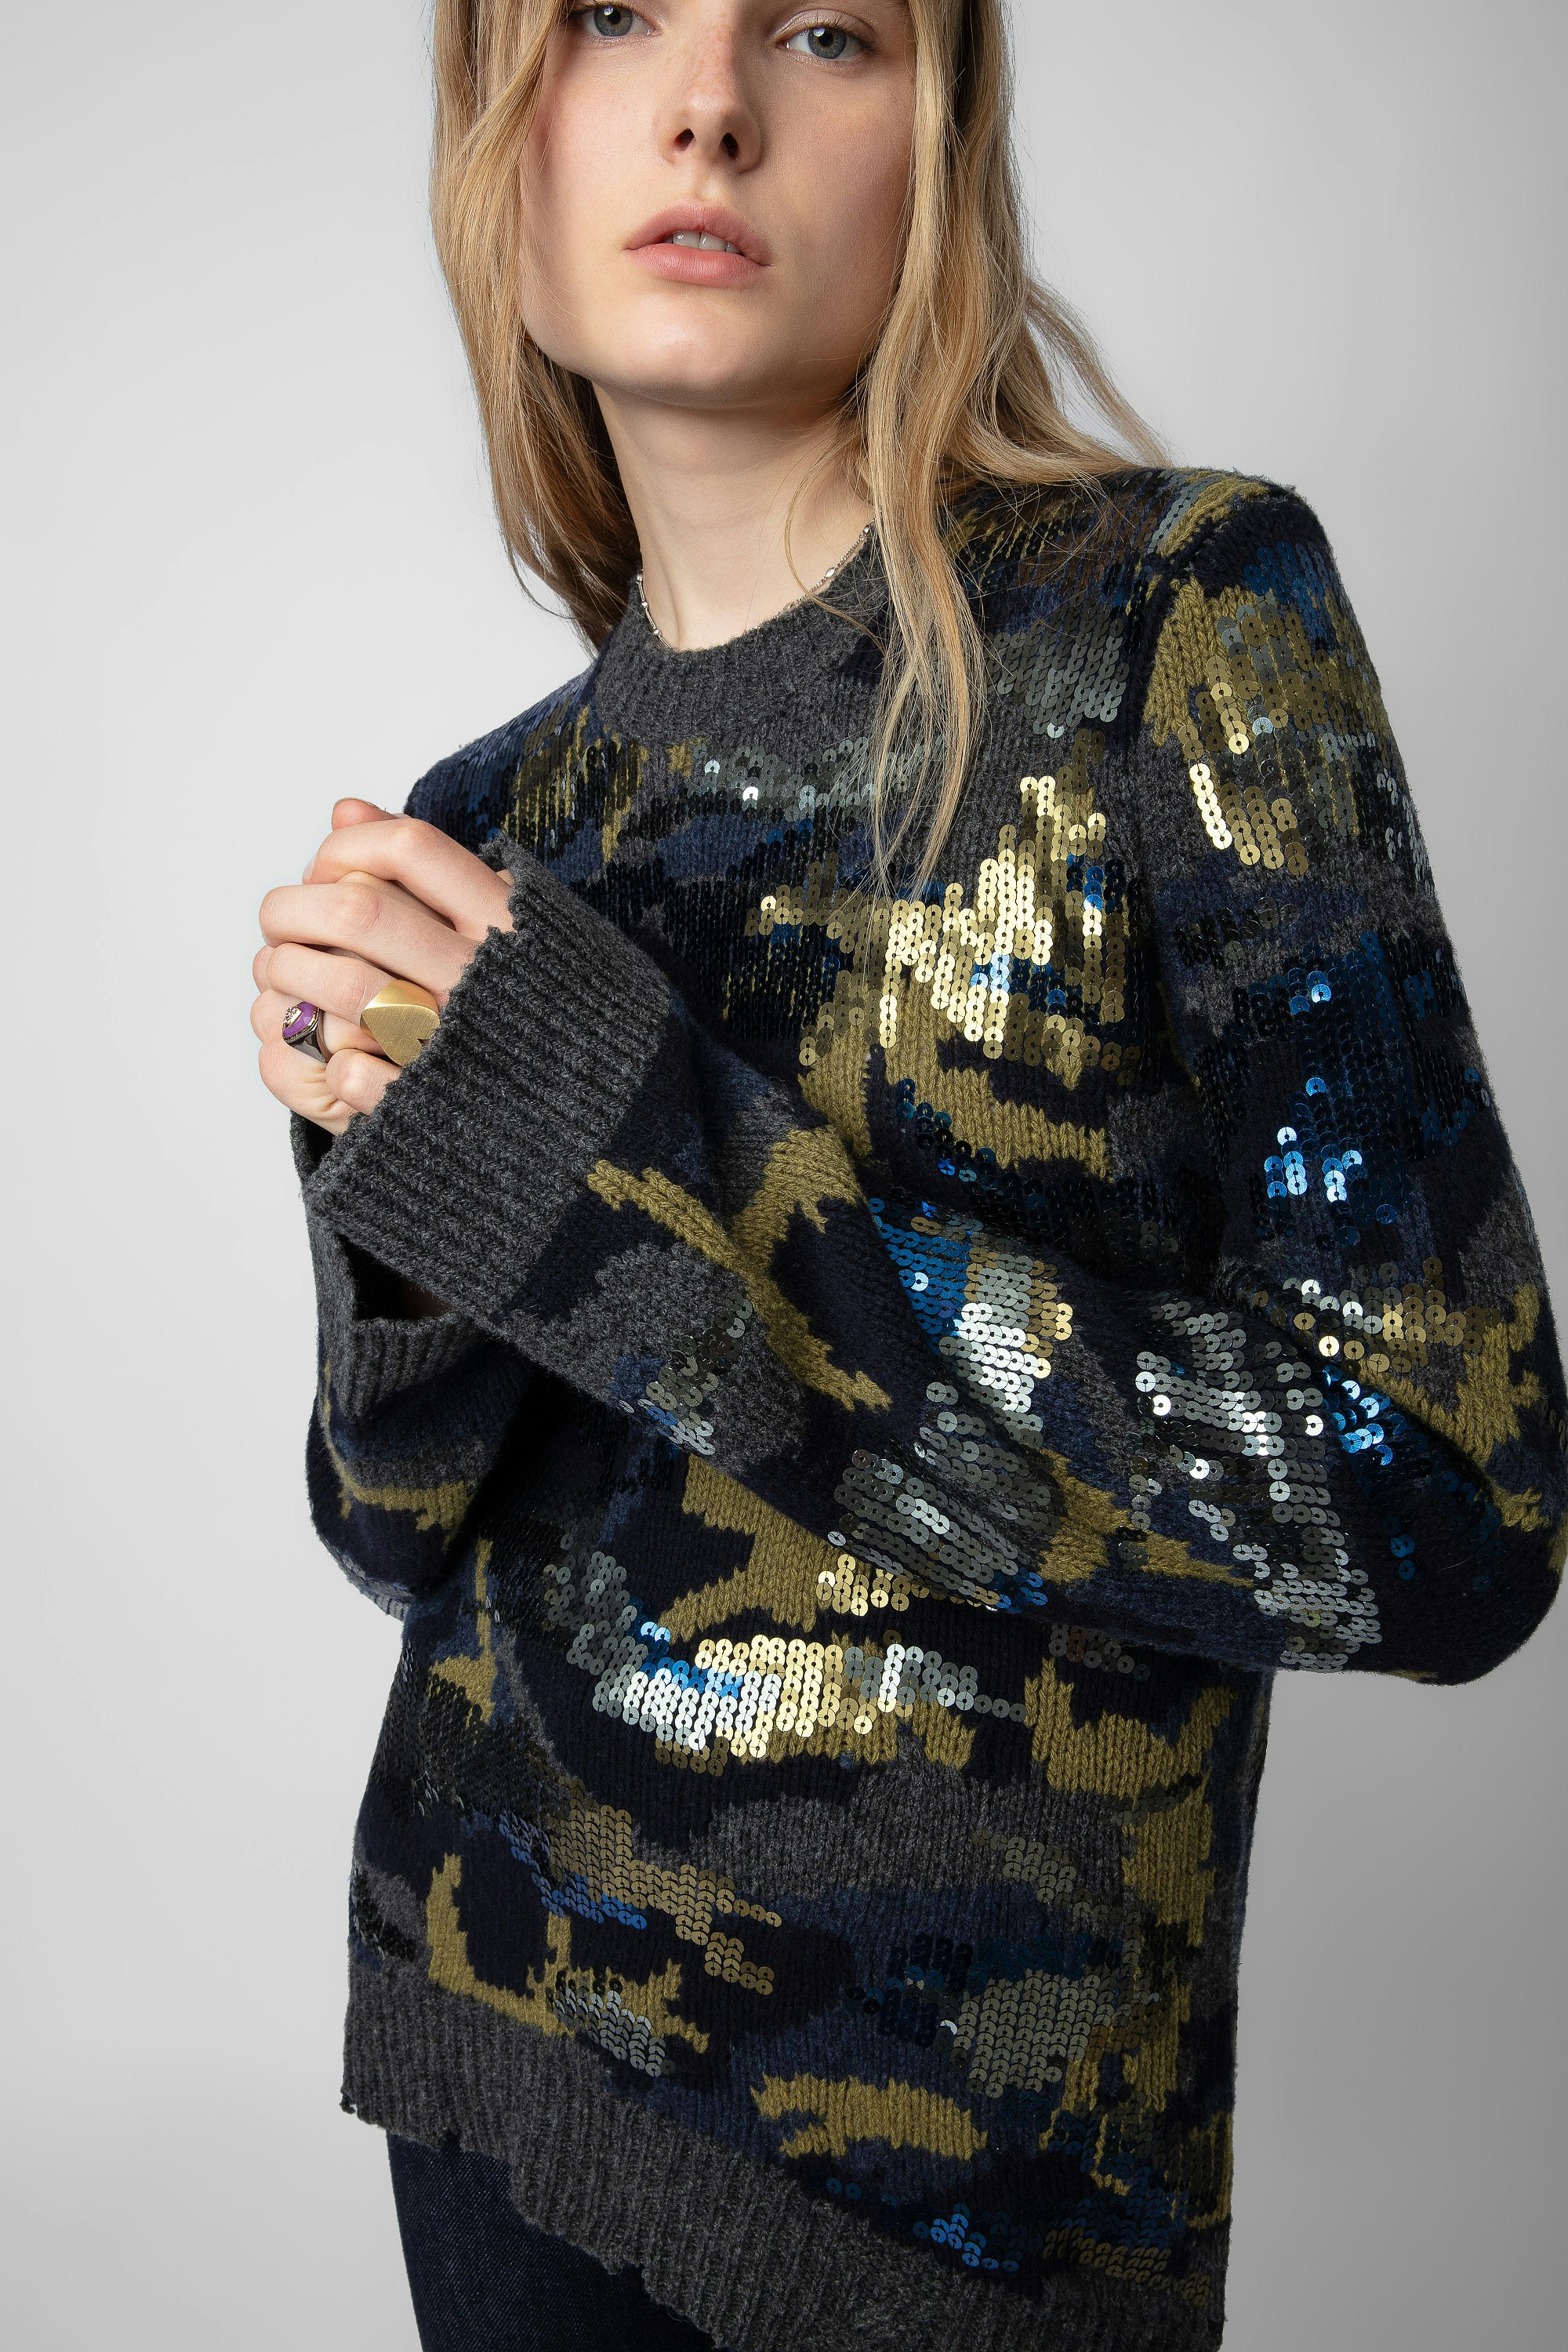 Cosmy Sequins Sweater - Women’s camouflage grey merino wool sweater with sequins.